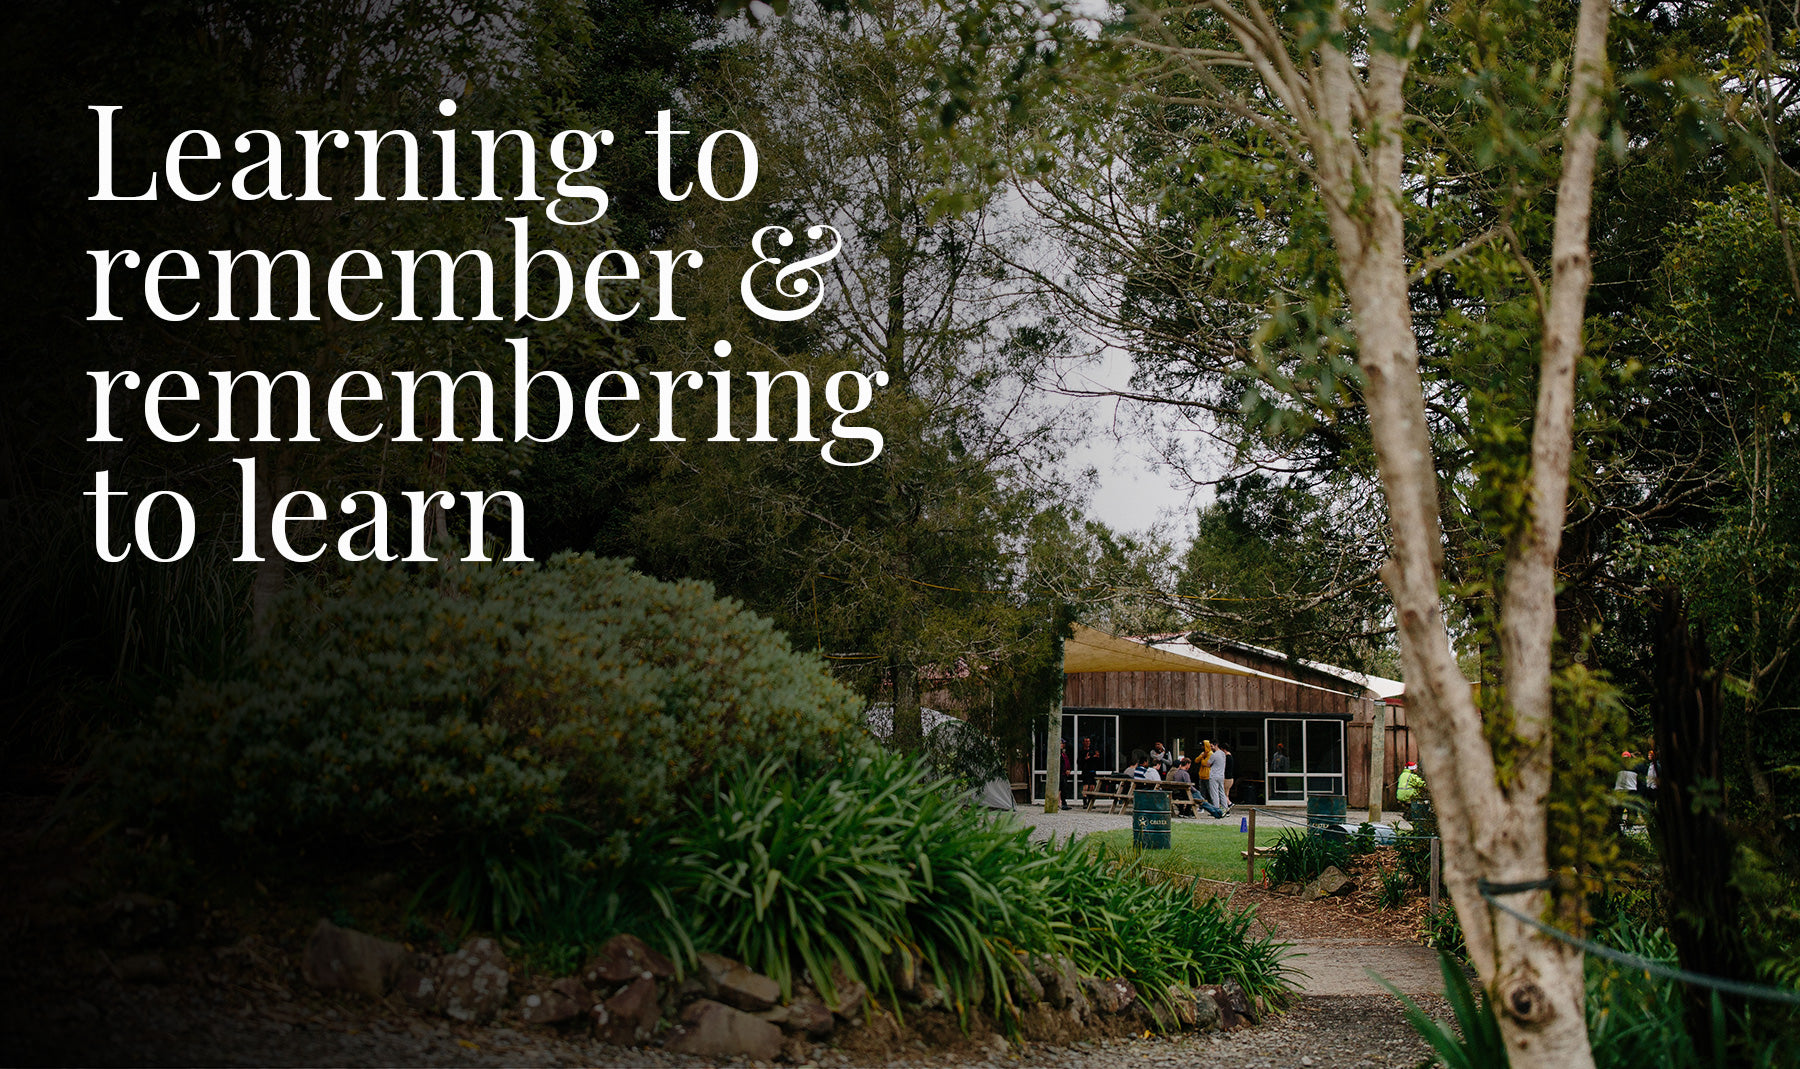 Learning to remember and remember to learn